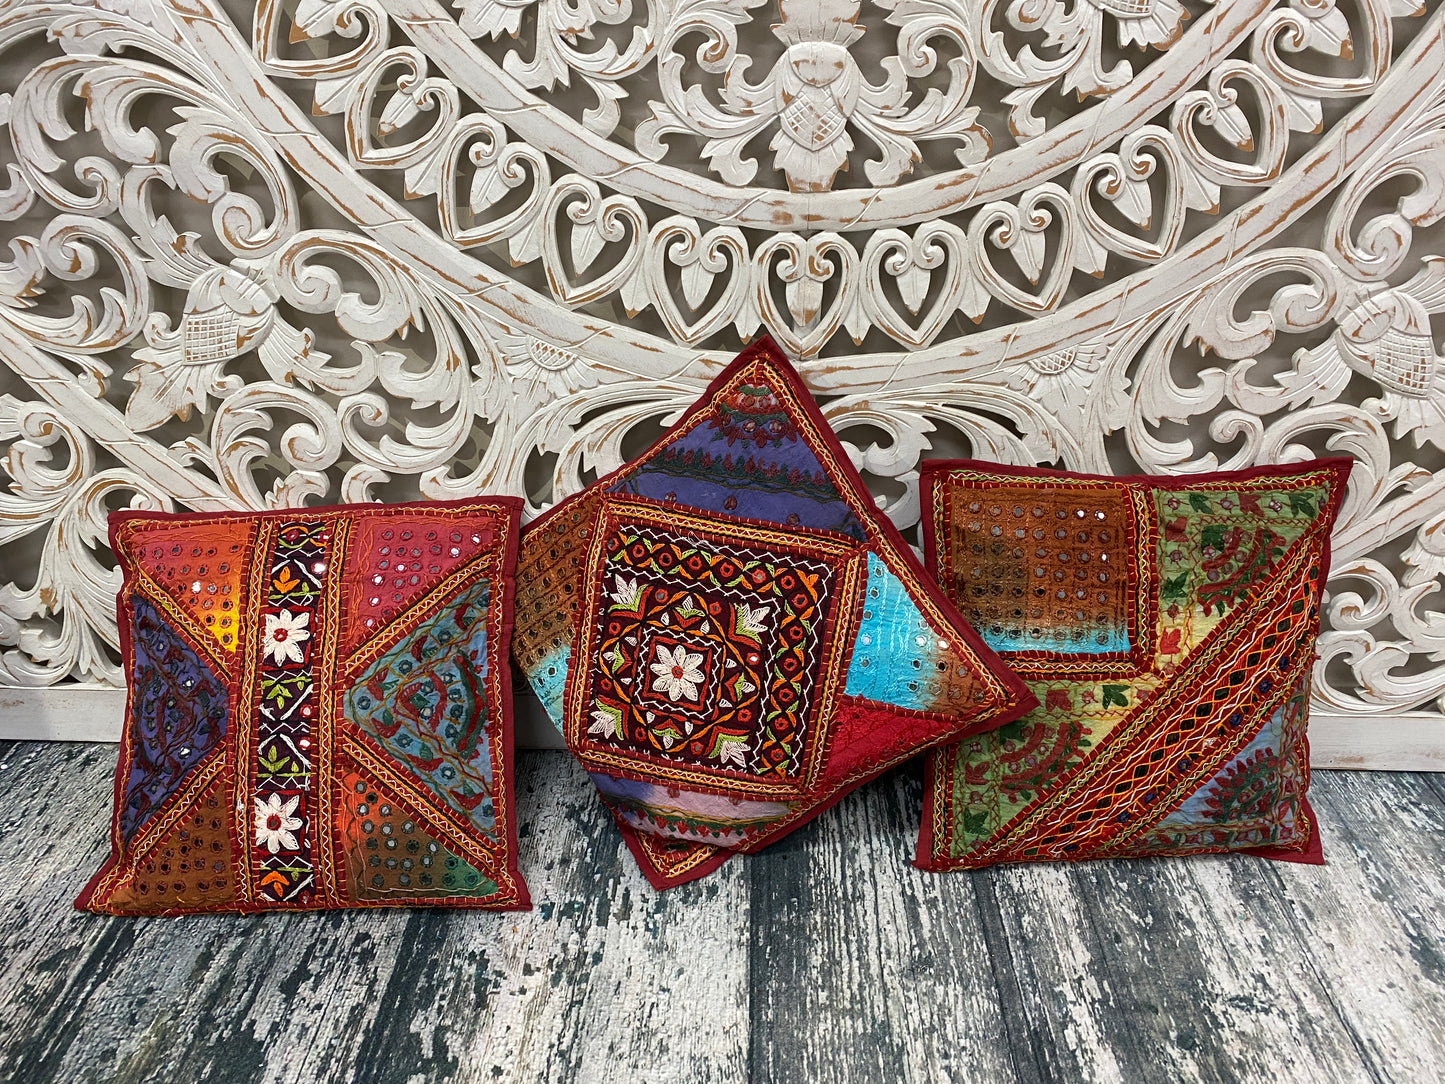 Rajasthani Embroidered Patchwork Throw Pillow Cases with Mirror Work - 3 Designs